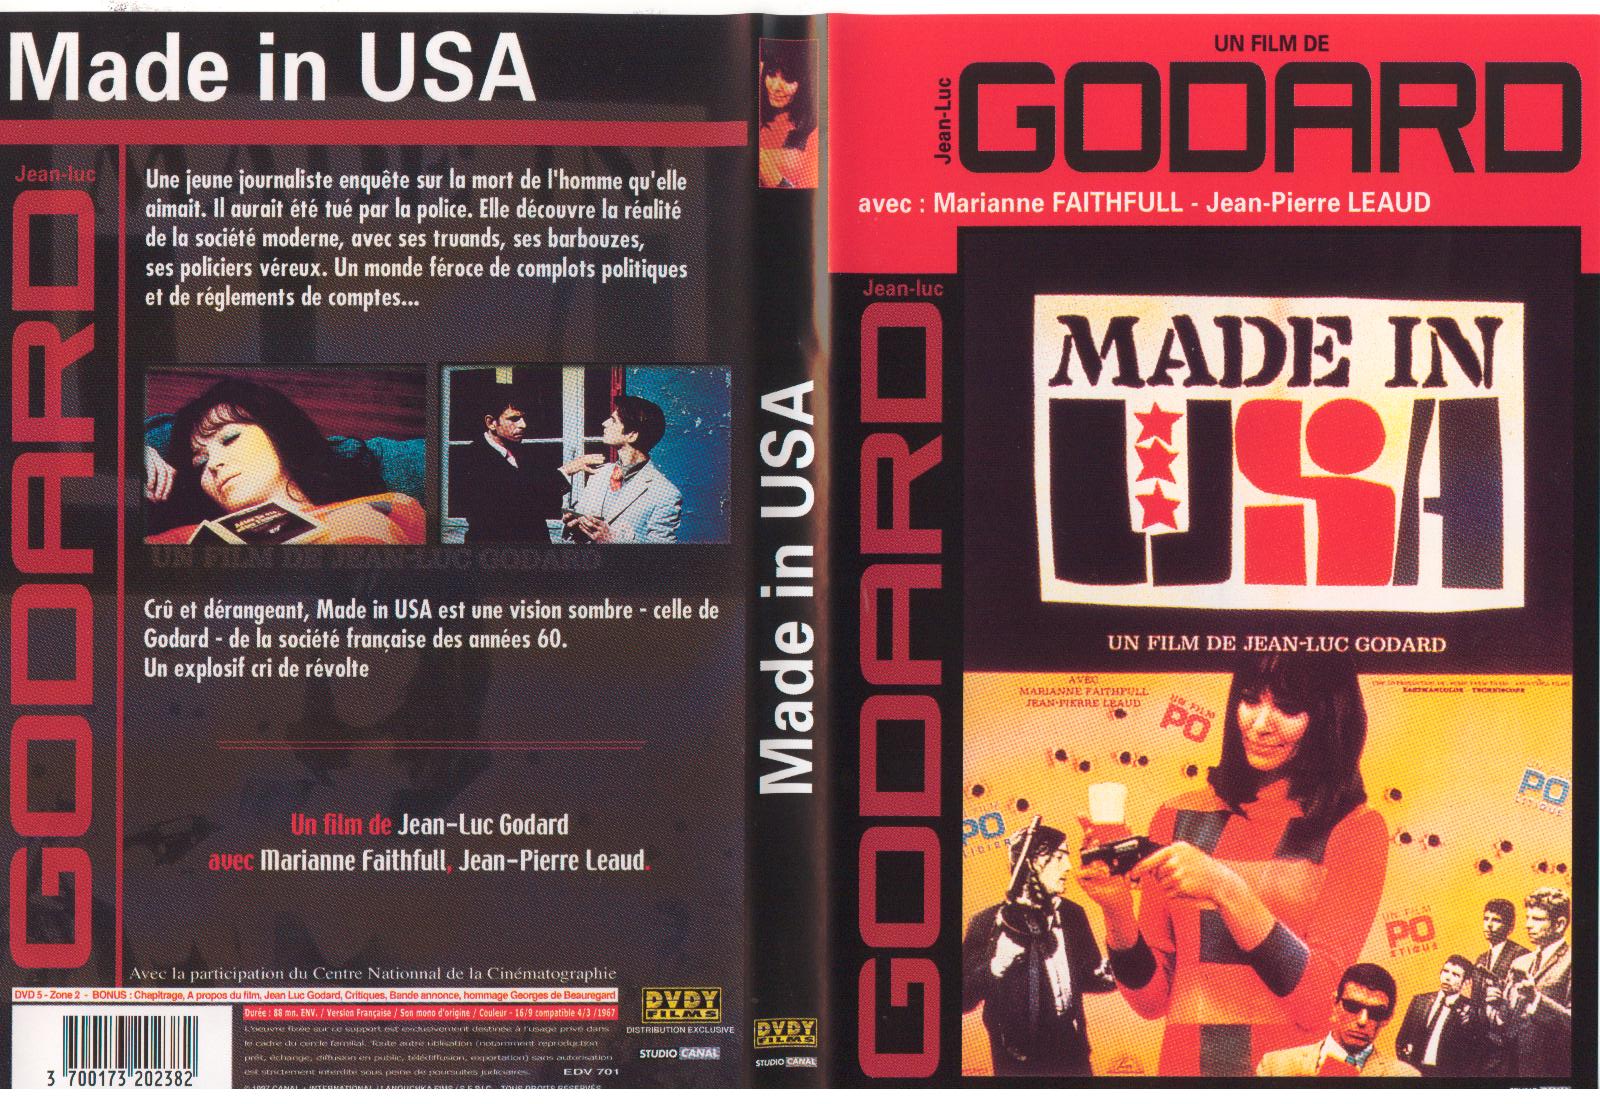 Jaquette DVD Made in USA